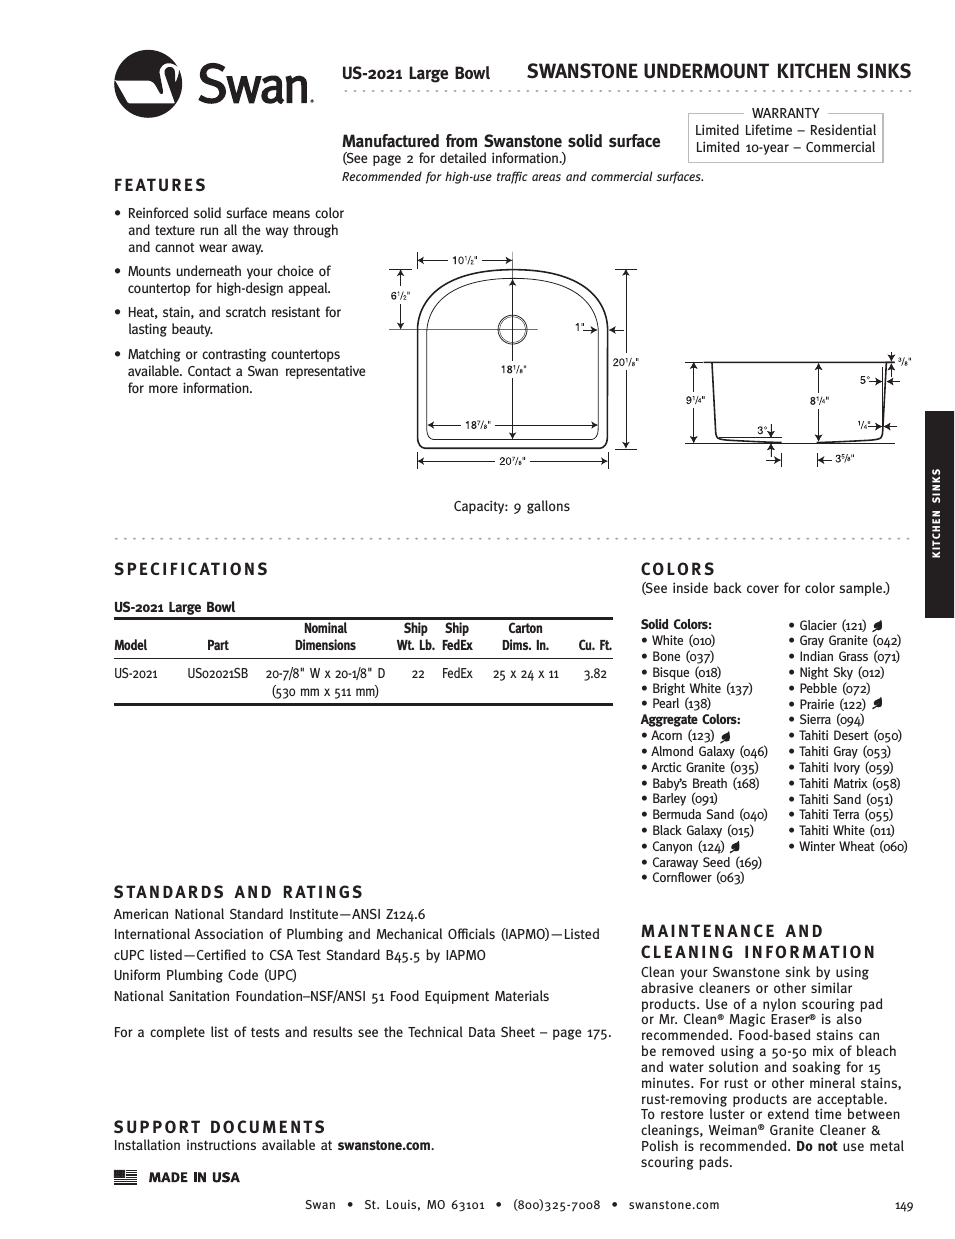 US-2021 - Specification